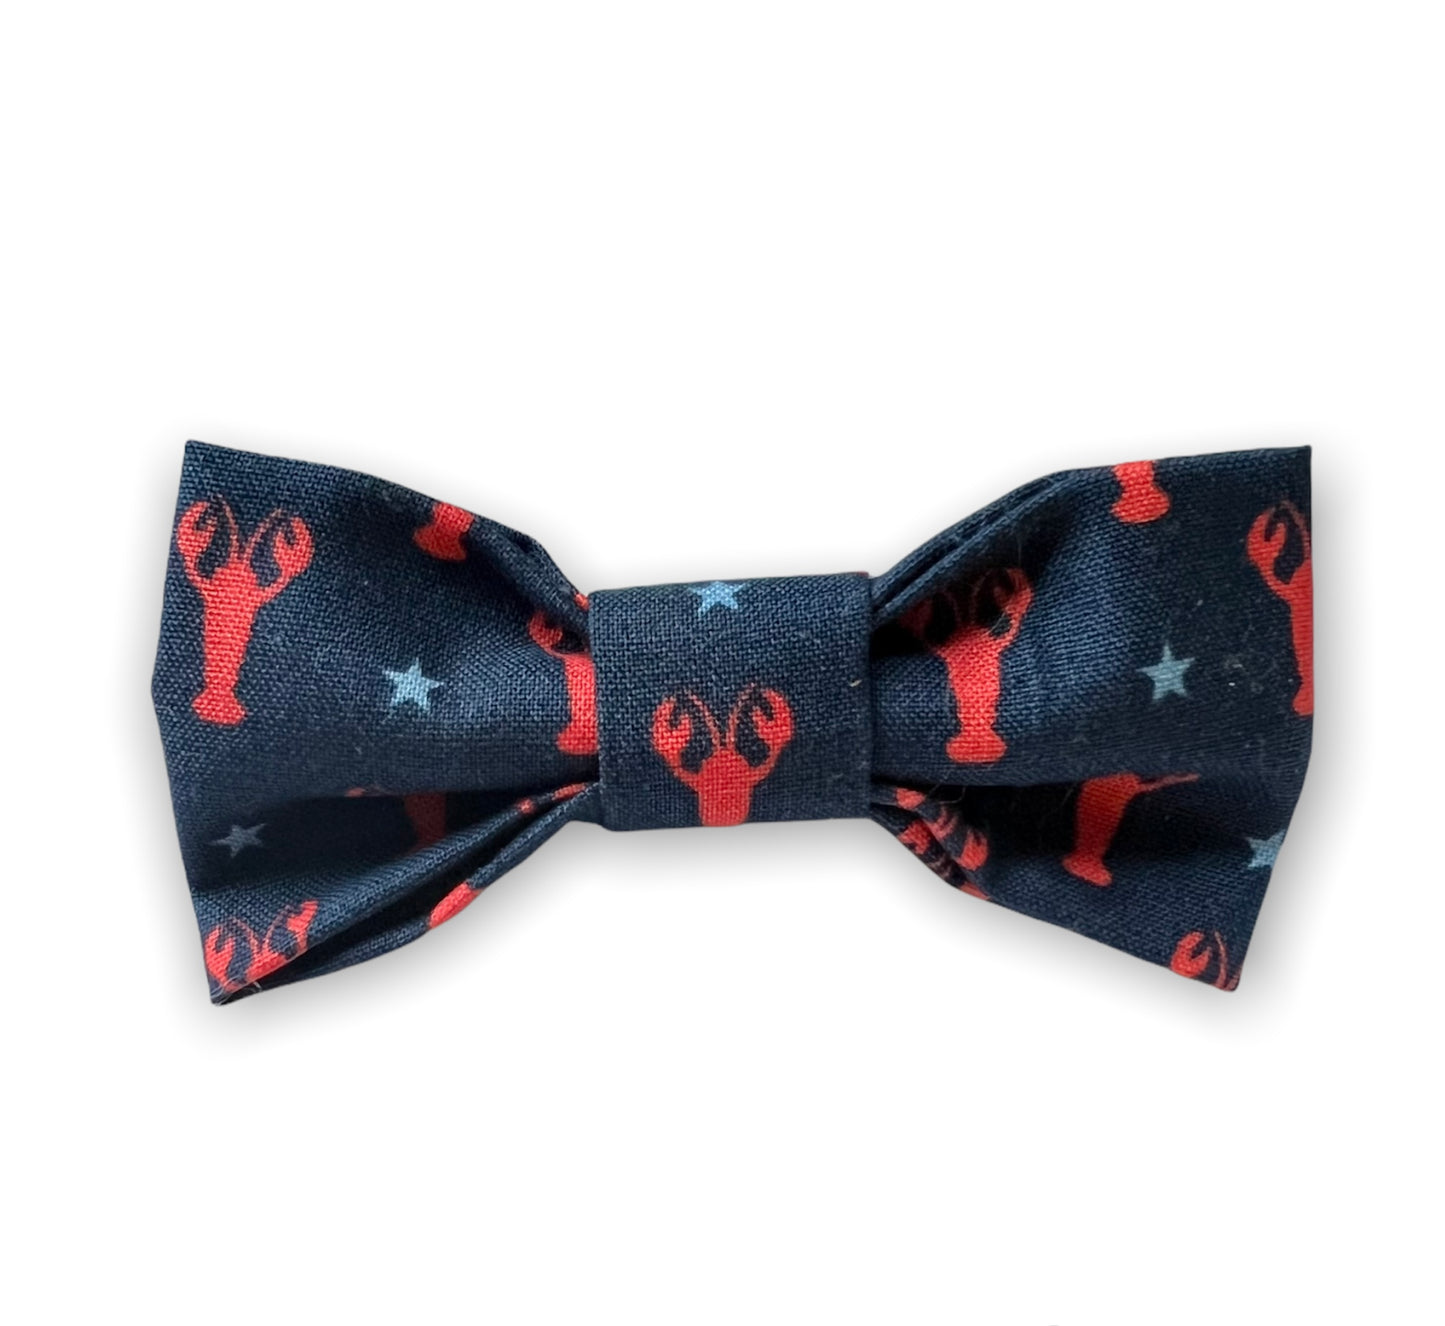 Lobster Fabric Hairbow | Children's Bow | Adult Bow | Collar Bow | Hair Accessory